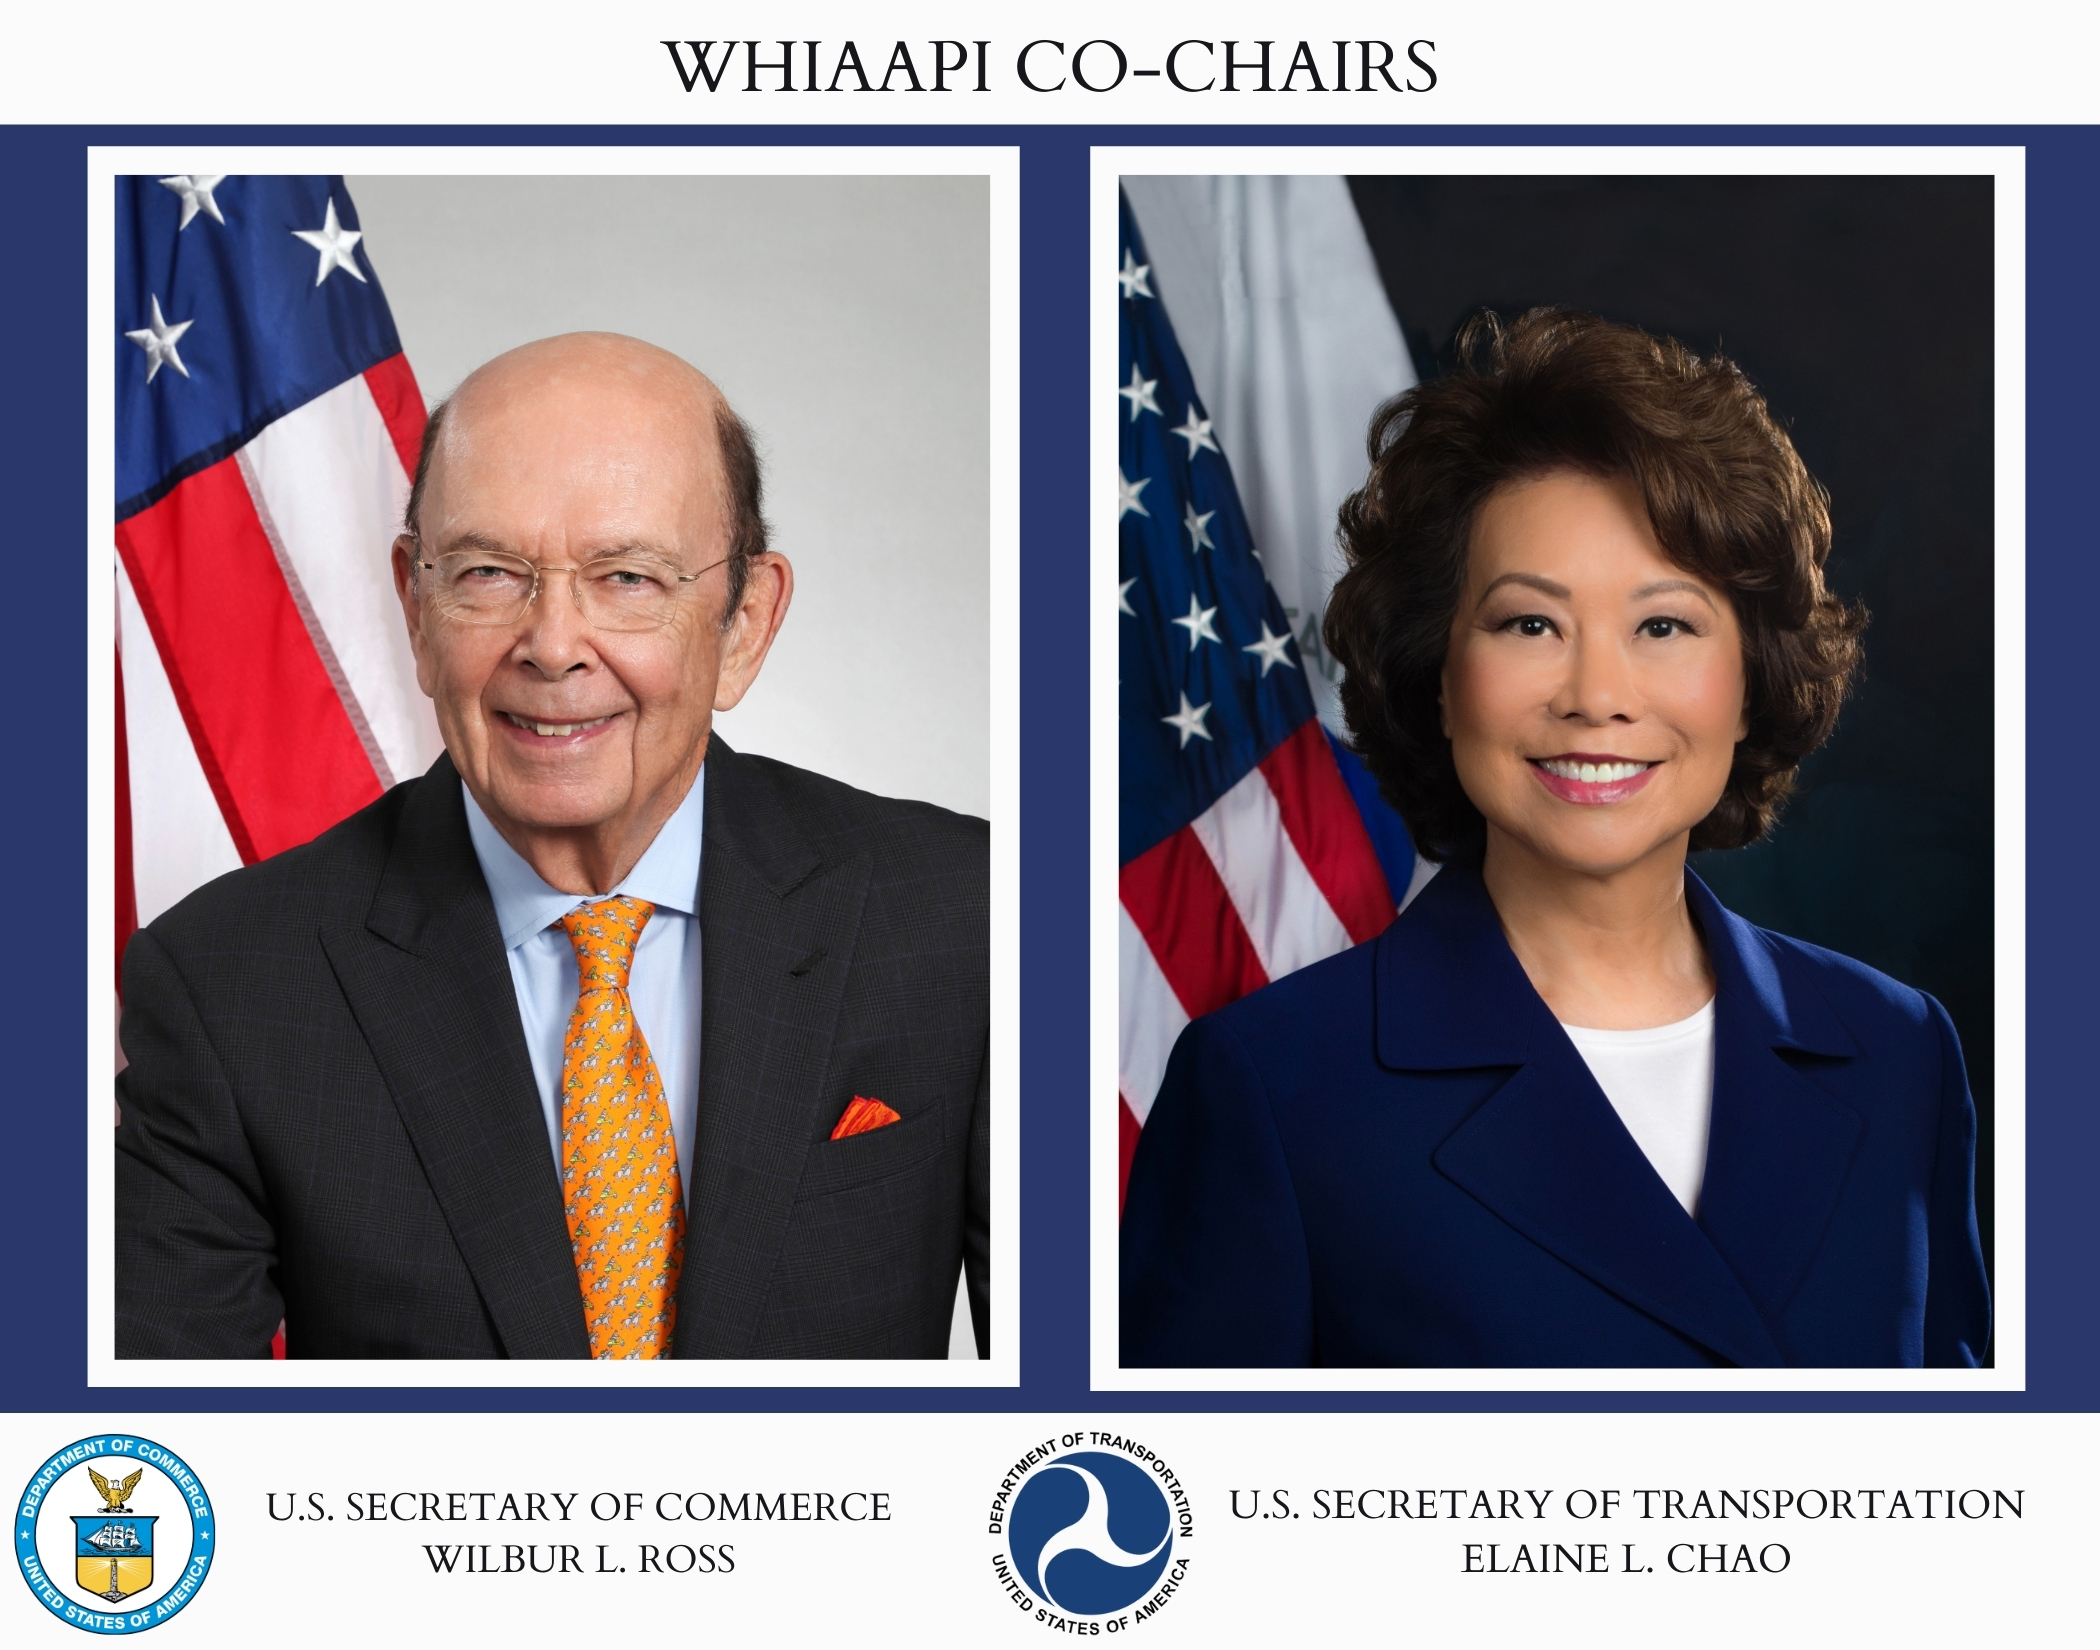 Co-Chairs